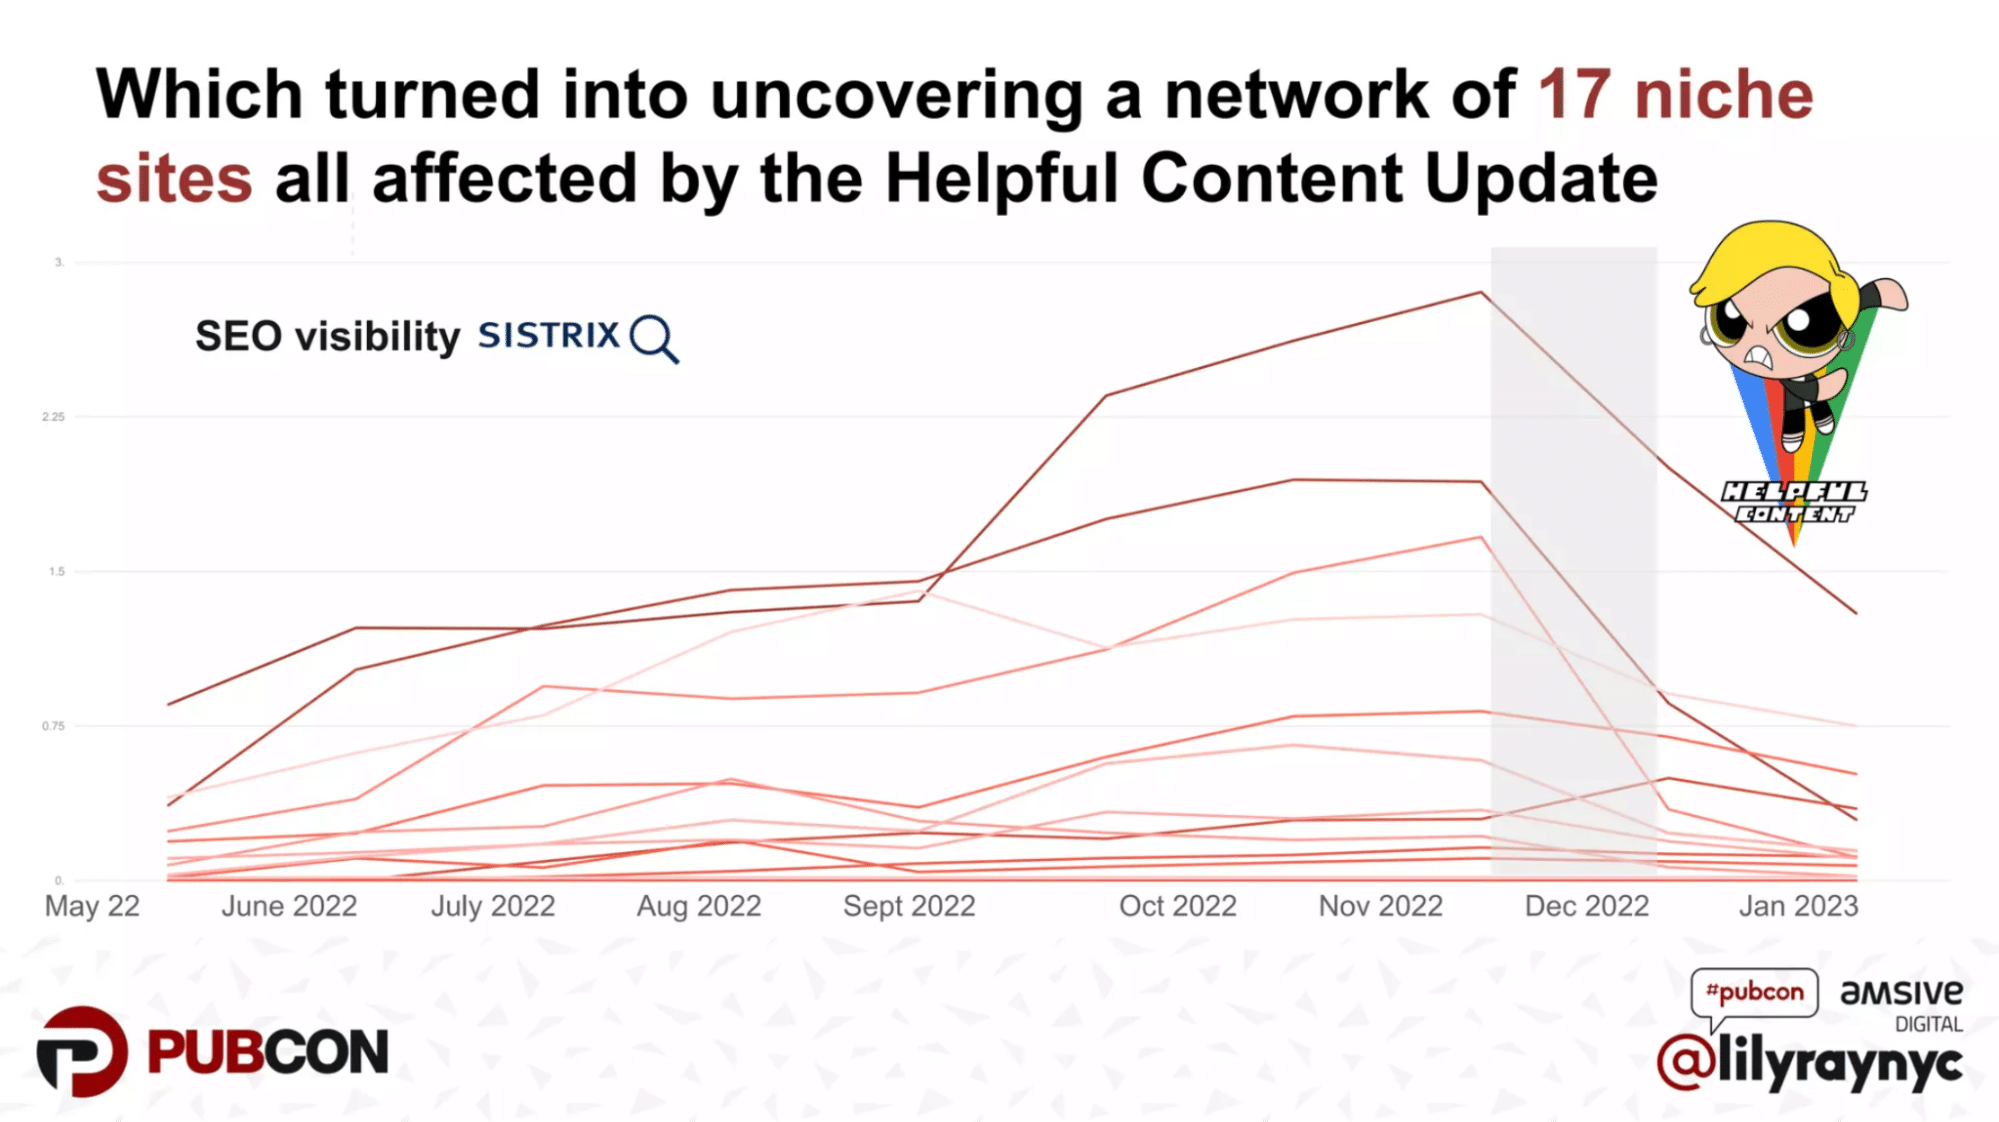 A graph showing a network of 17 sites' rankings hit after the rollout of the helpful content update.